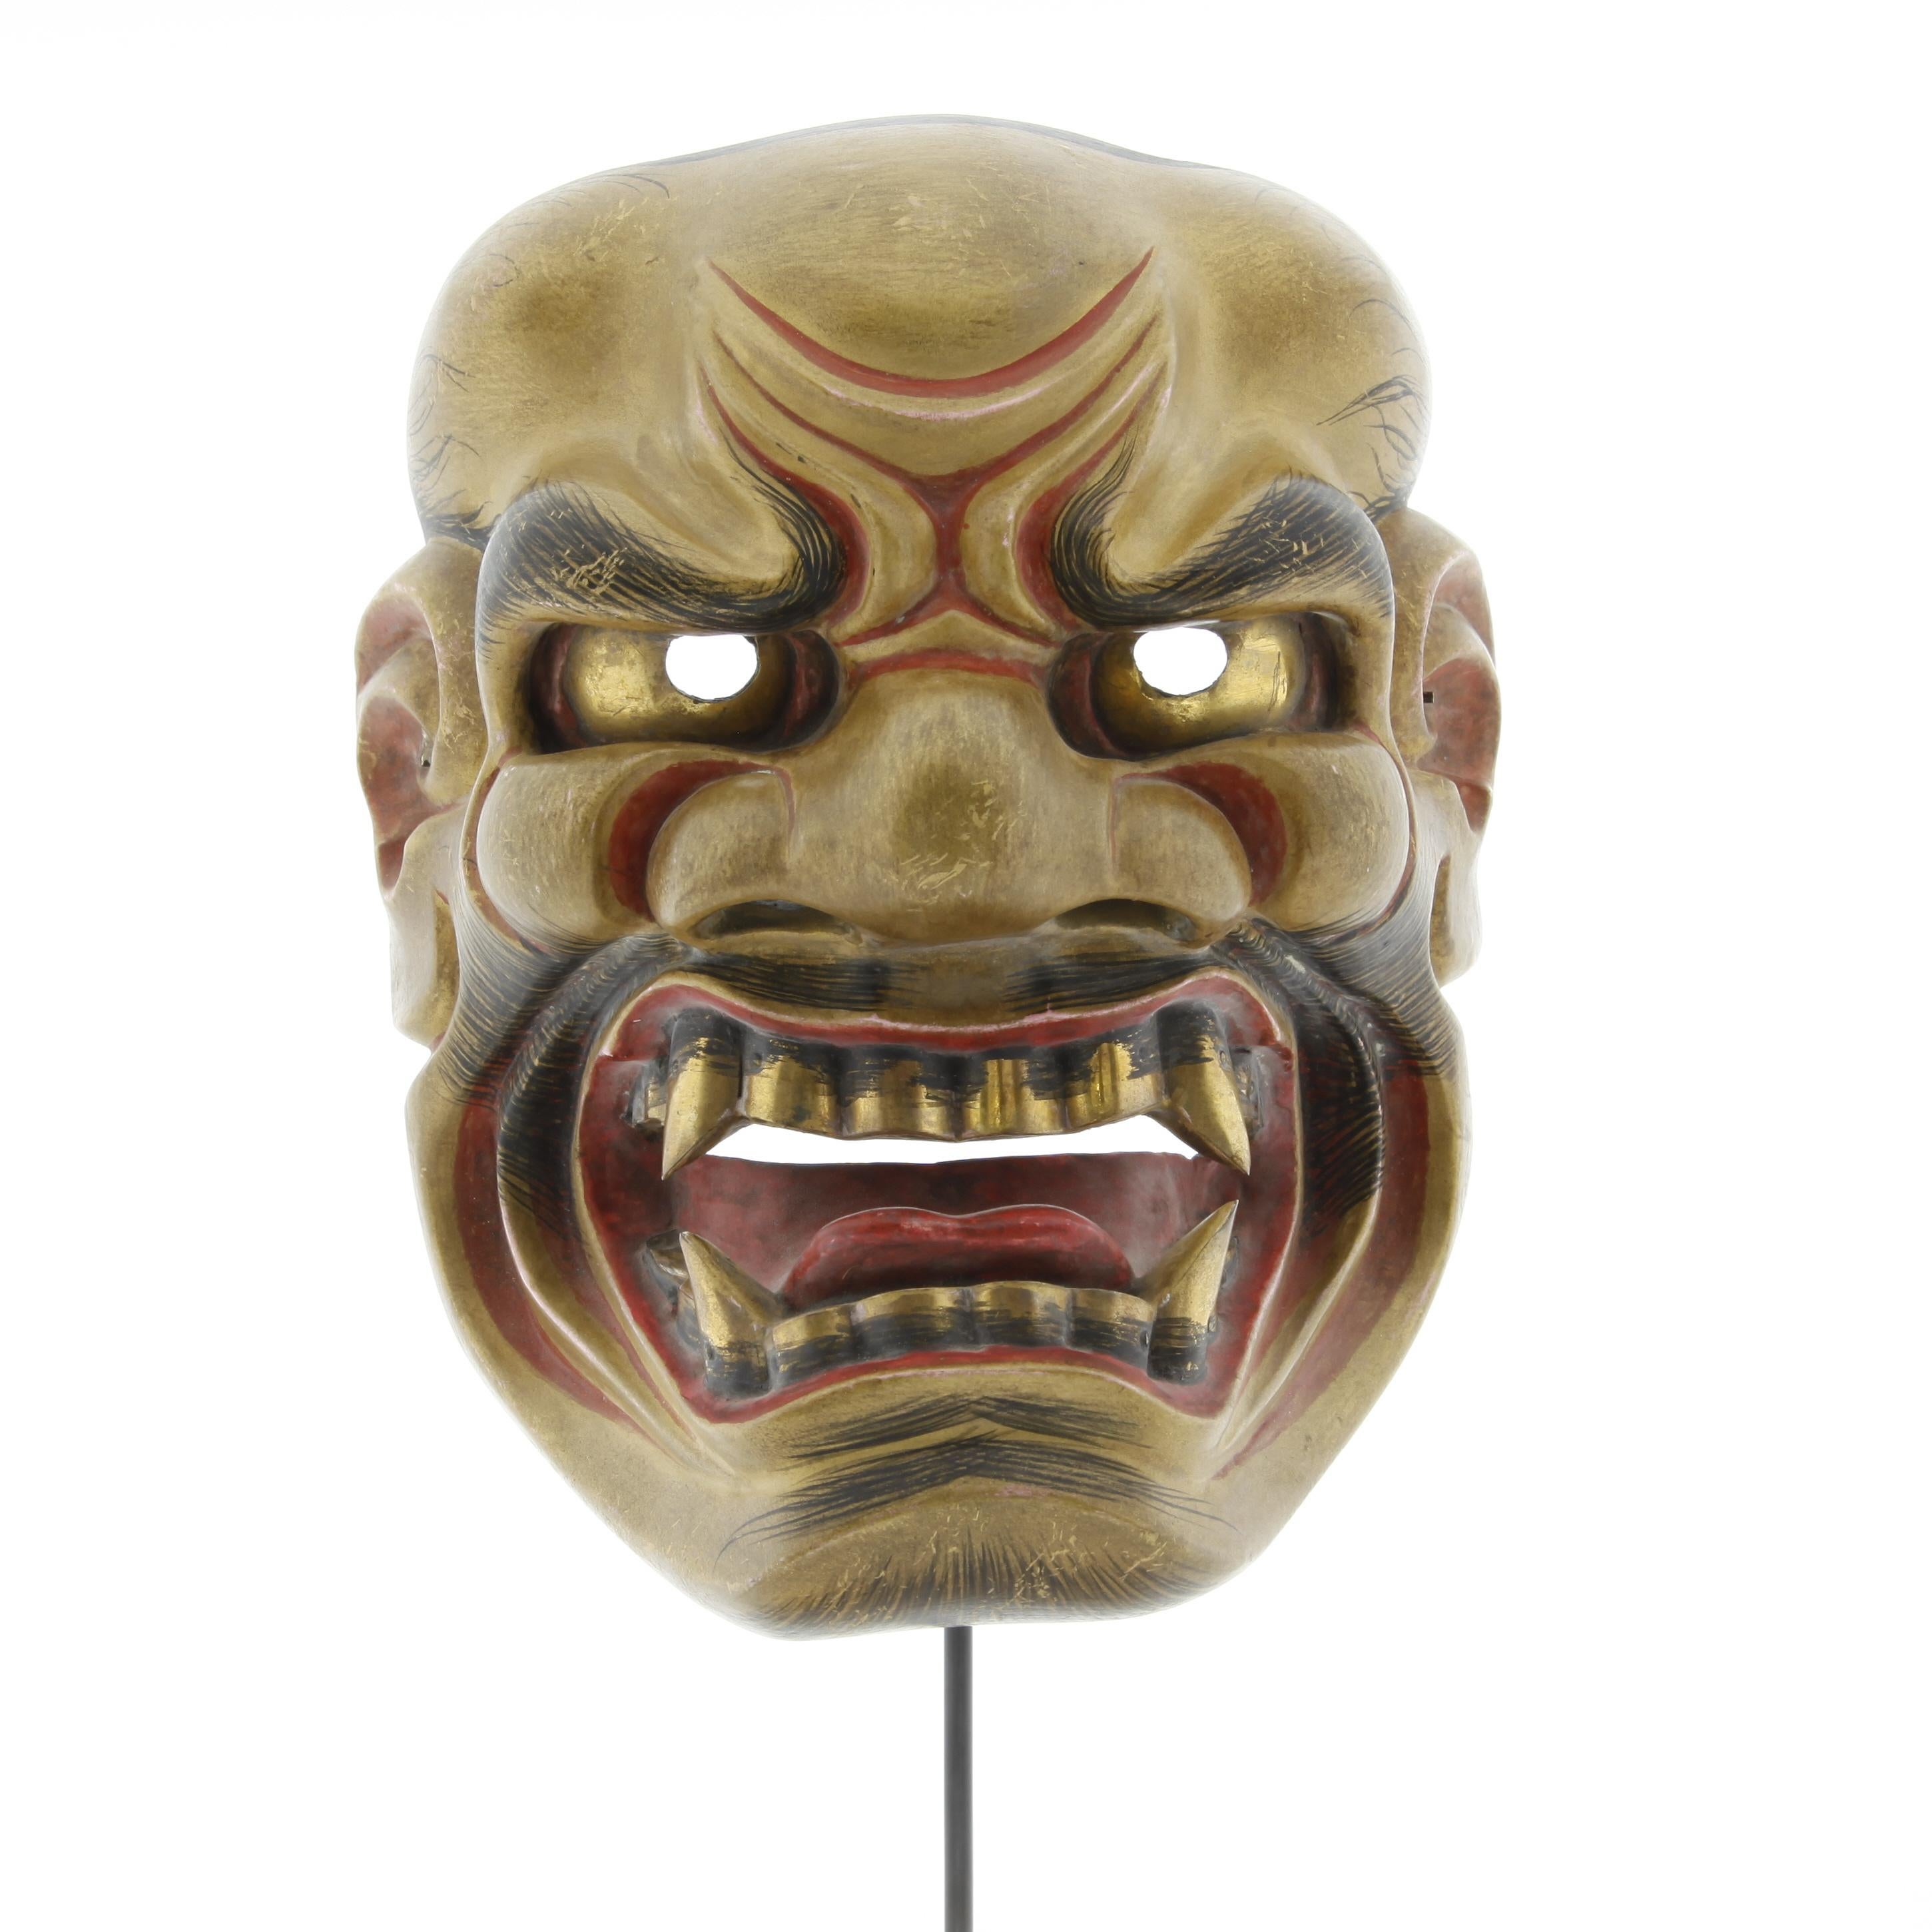 Unknown Figurative Sculpture - Noh Mask of a Fierce God, Actor, Japanese Theatre, Drama, 19th Century Woodcraft